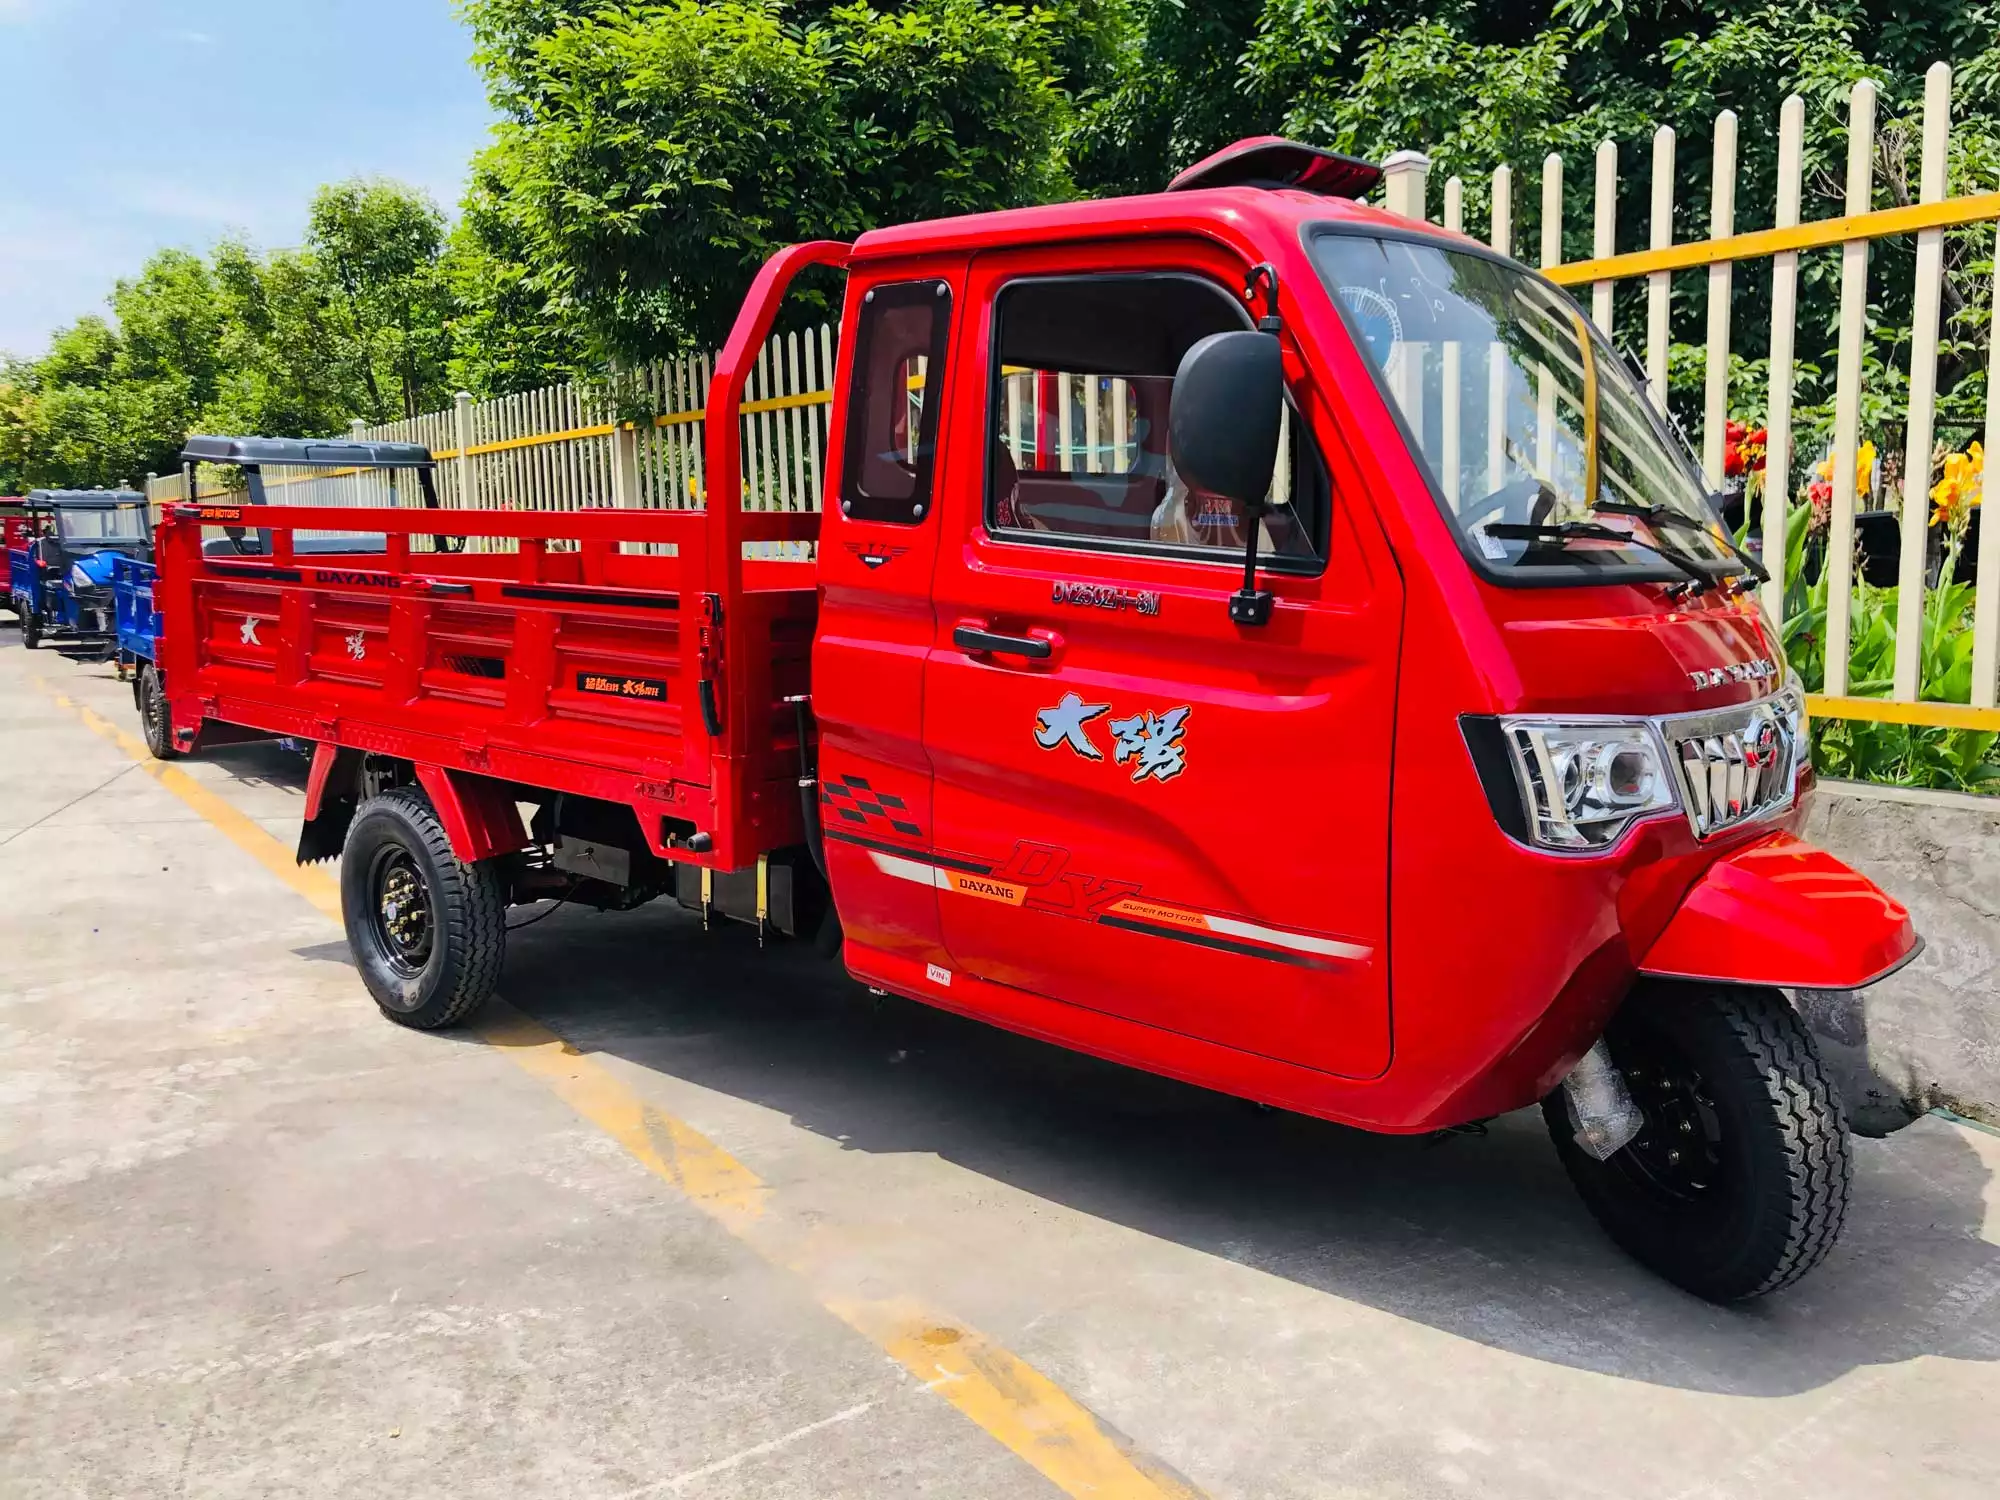 Dayang Luxury Series 800cc powerful Heavy Duty Cargo Tricycle T7 Closed Cab Large Cargo Box Car Steering Wheel Tricycle